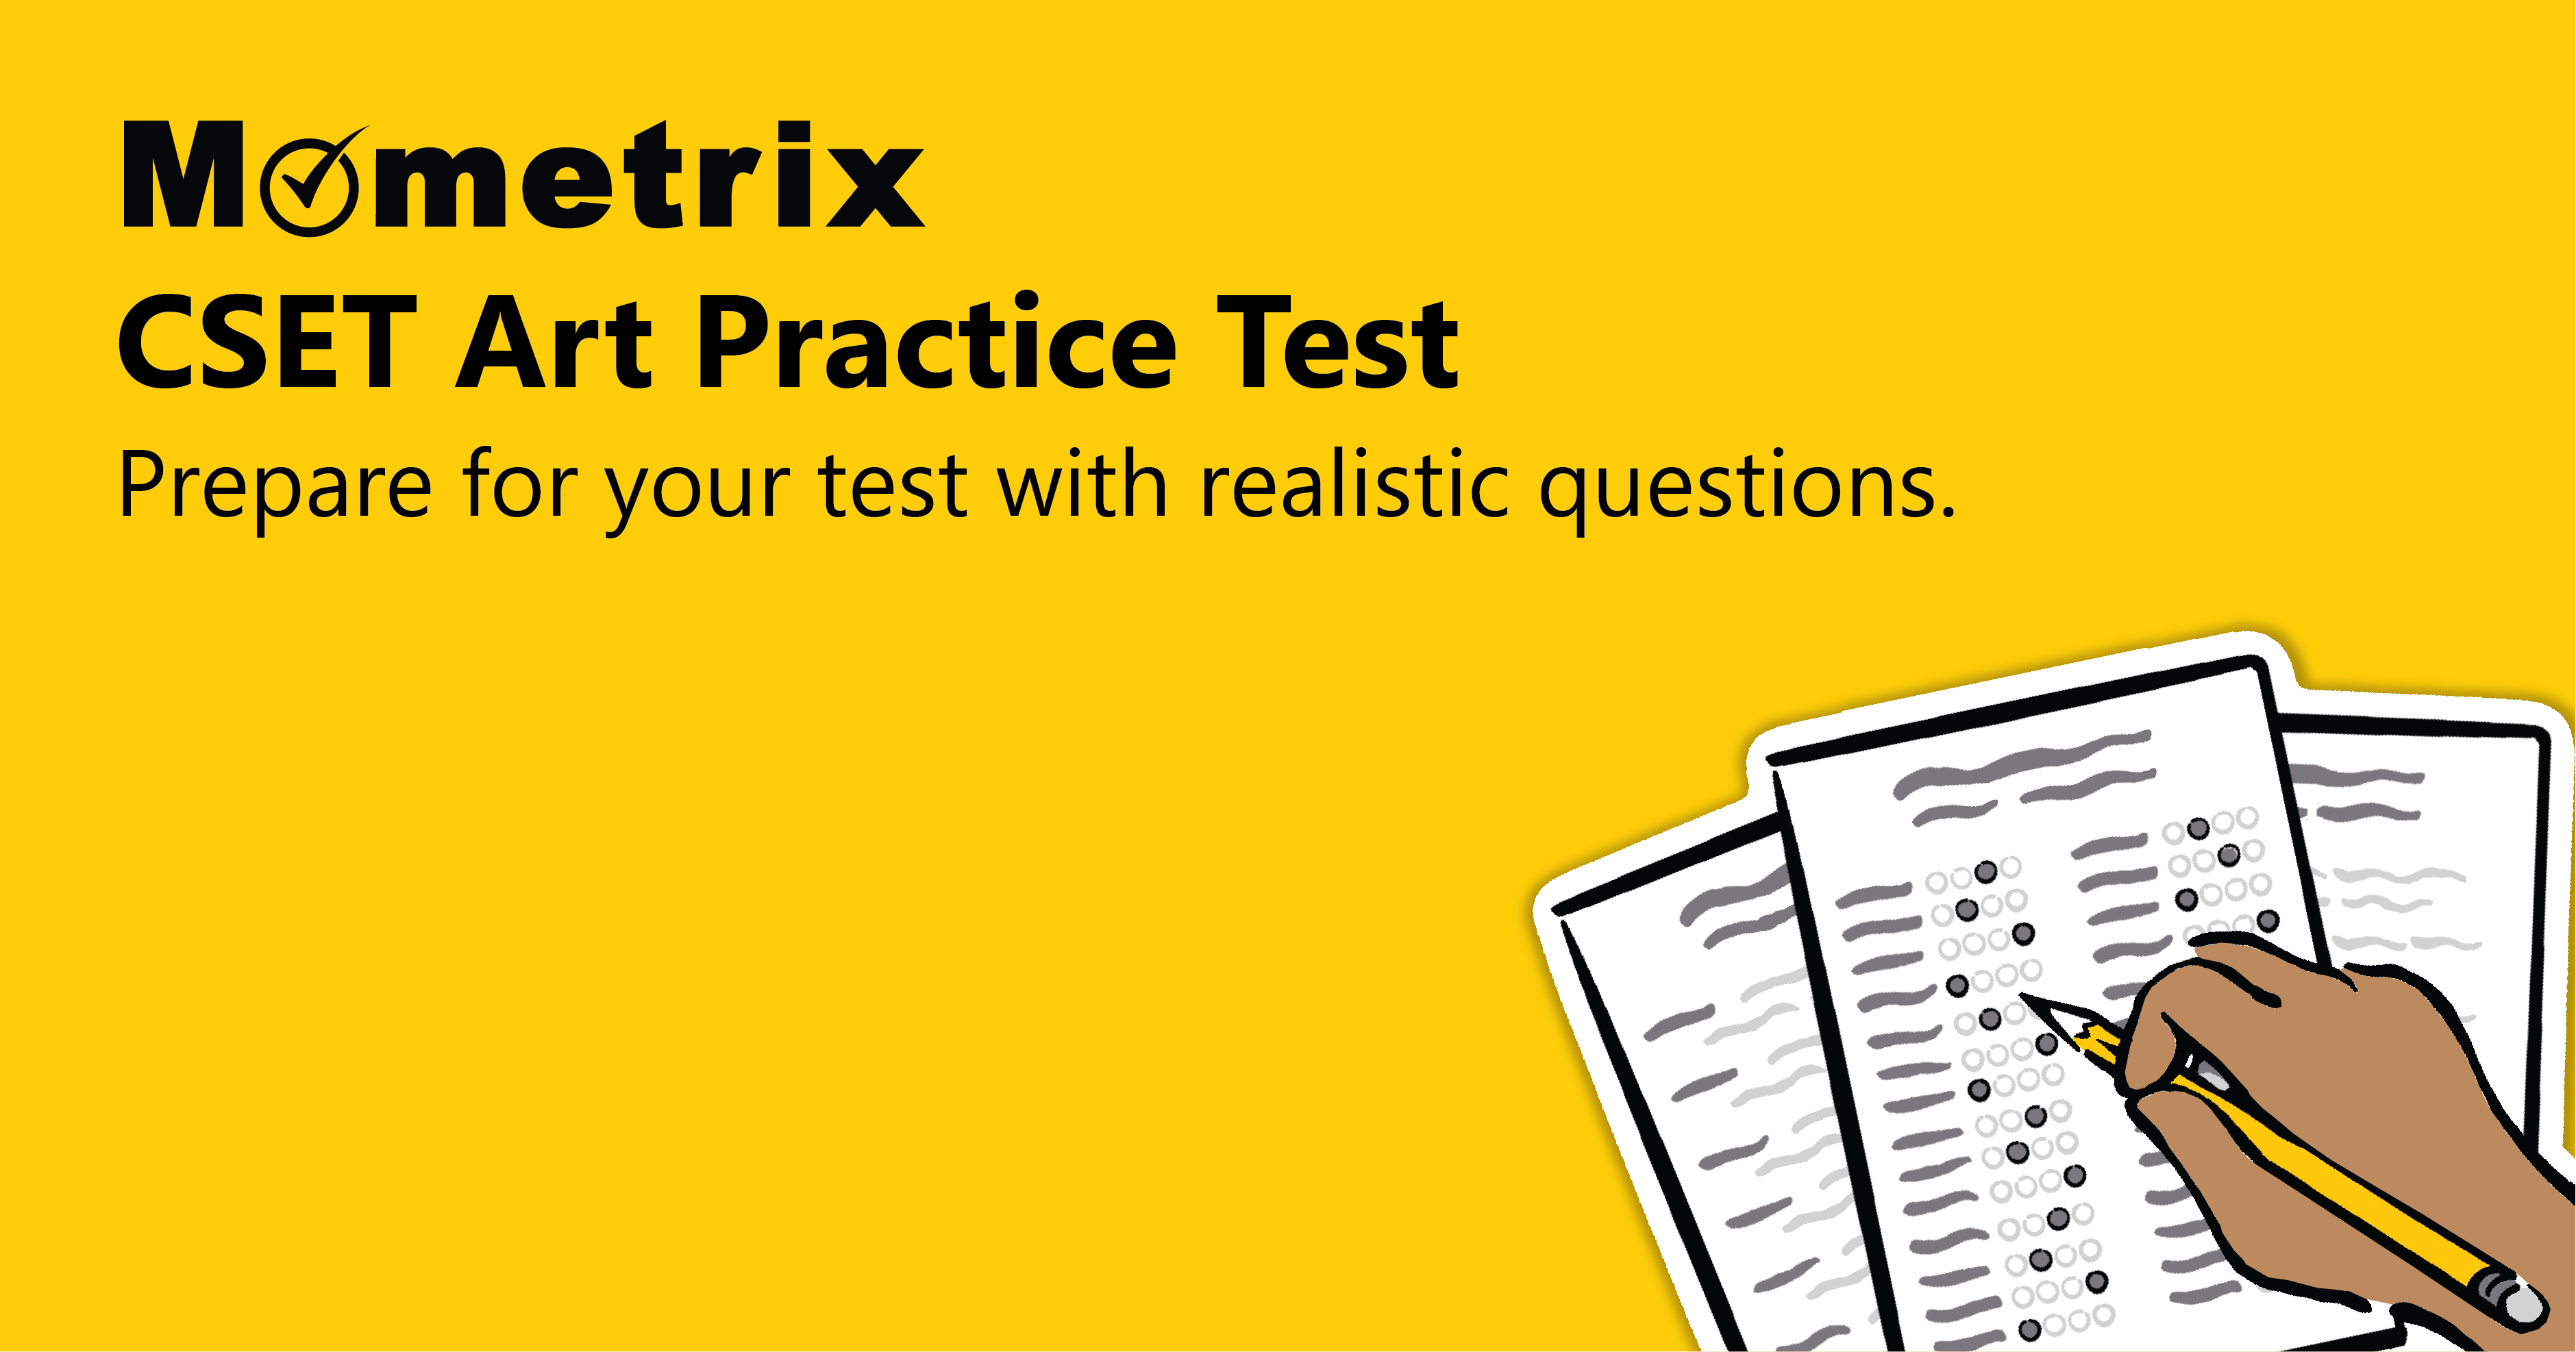 Yellow background with the text "Mometrix CSET Art Practice Test. Prepare for your test with realistic questions." Shows a hand holding a pencil and answering a multiple-choice test.